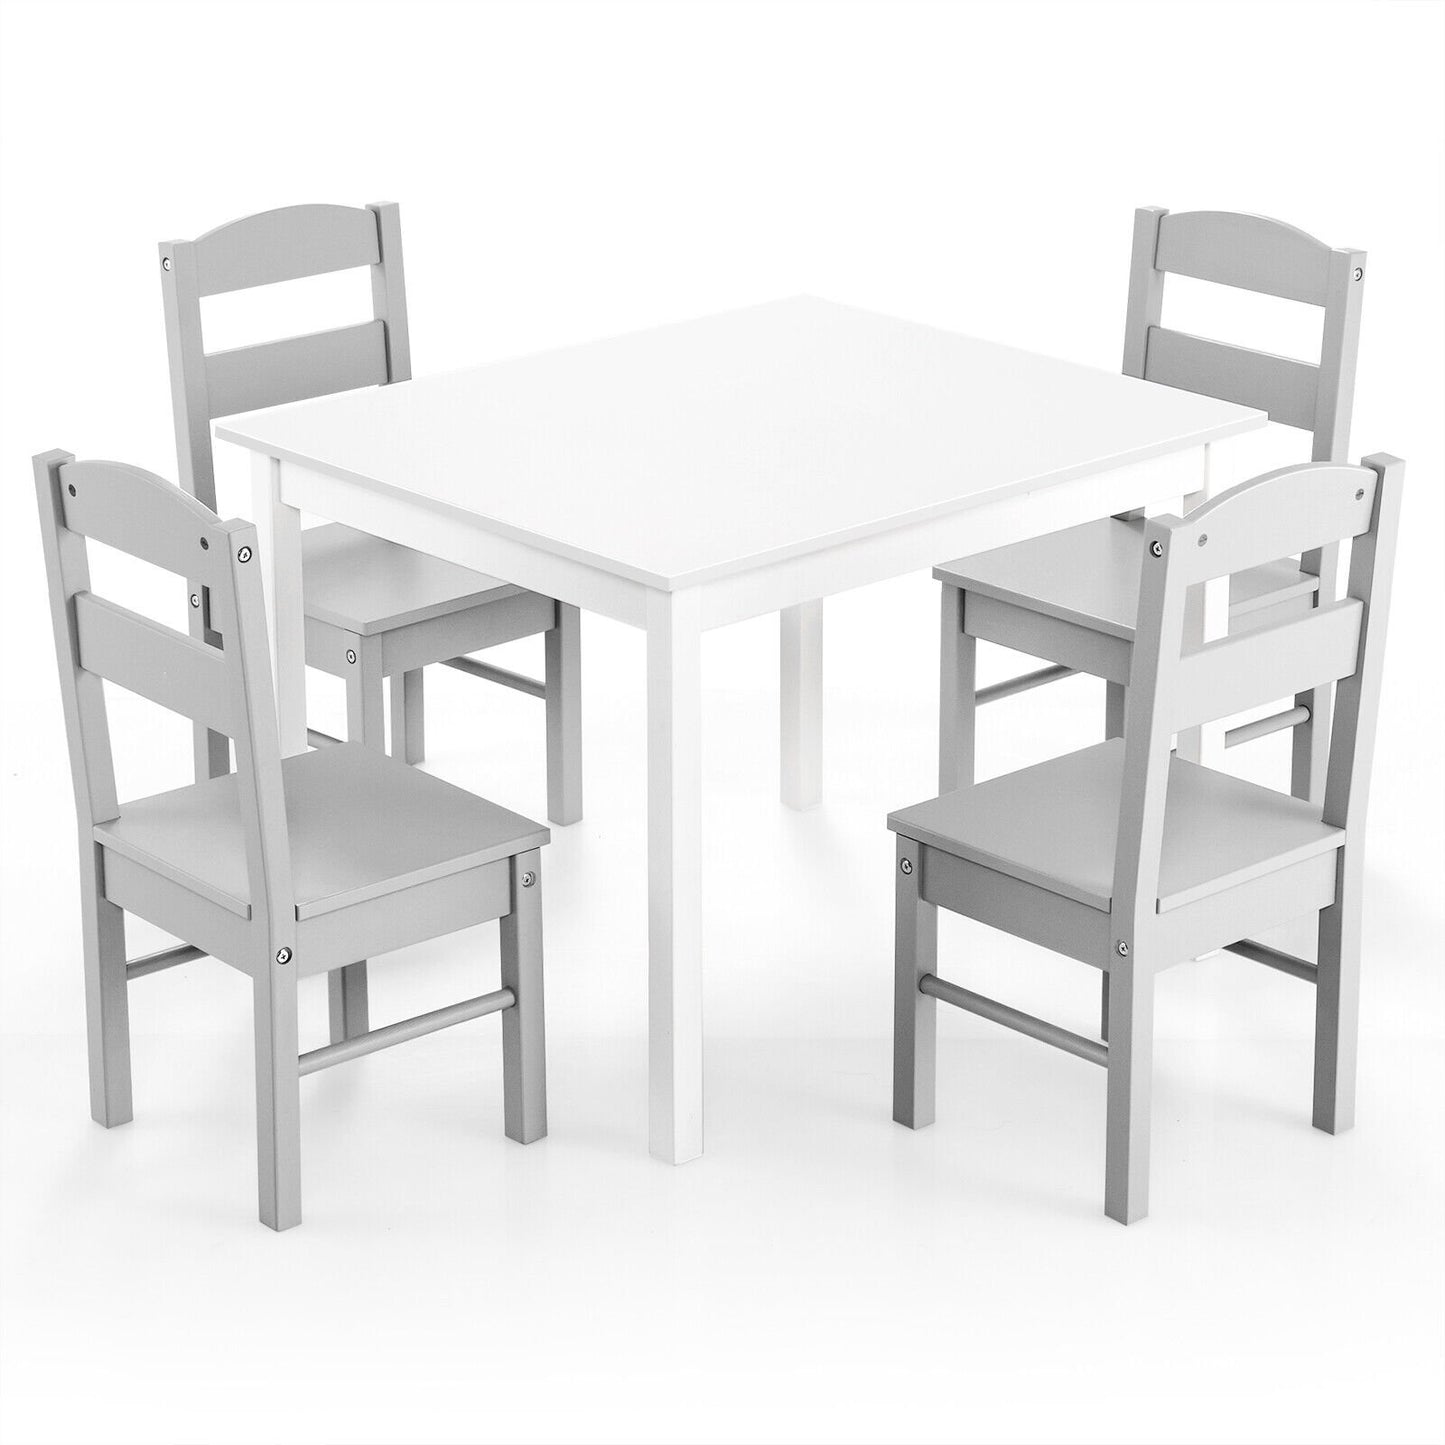 Kids 5 Piece Table and Chair Set Wooden Children Activity Playroom Furniture Gift, White